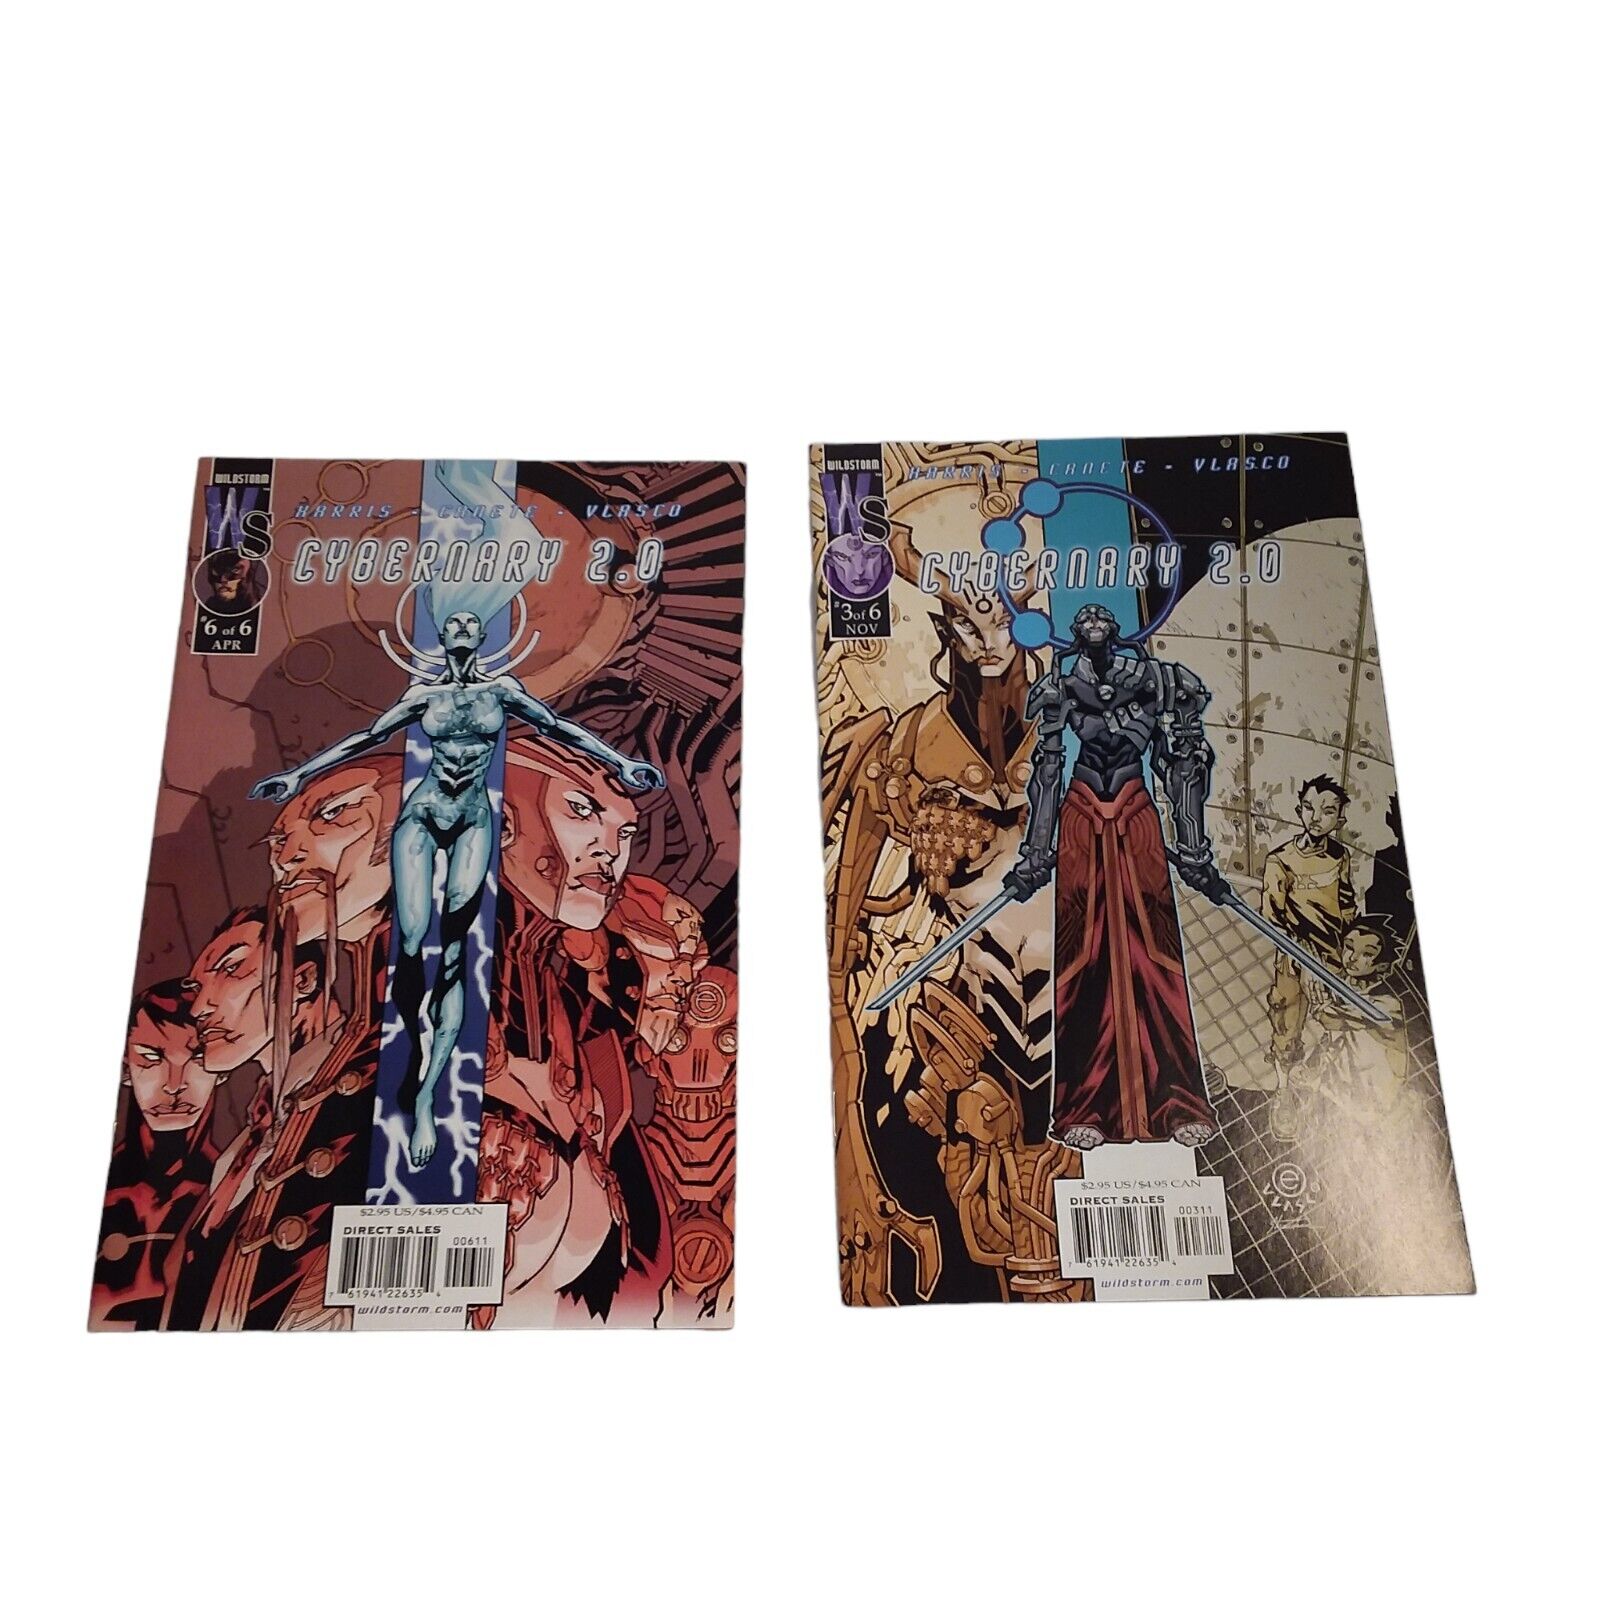 Wildstorm Comics Cybernary 2.0 #3 of 6 and #6 of 6